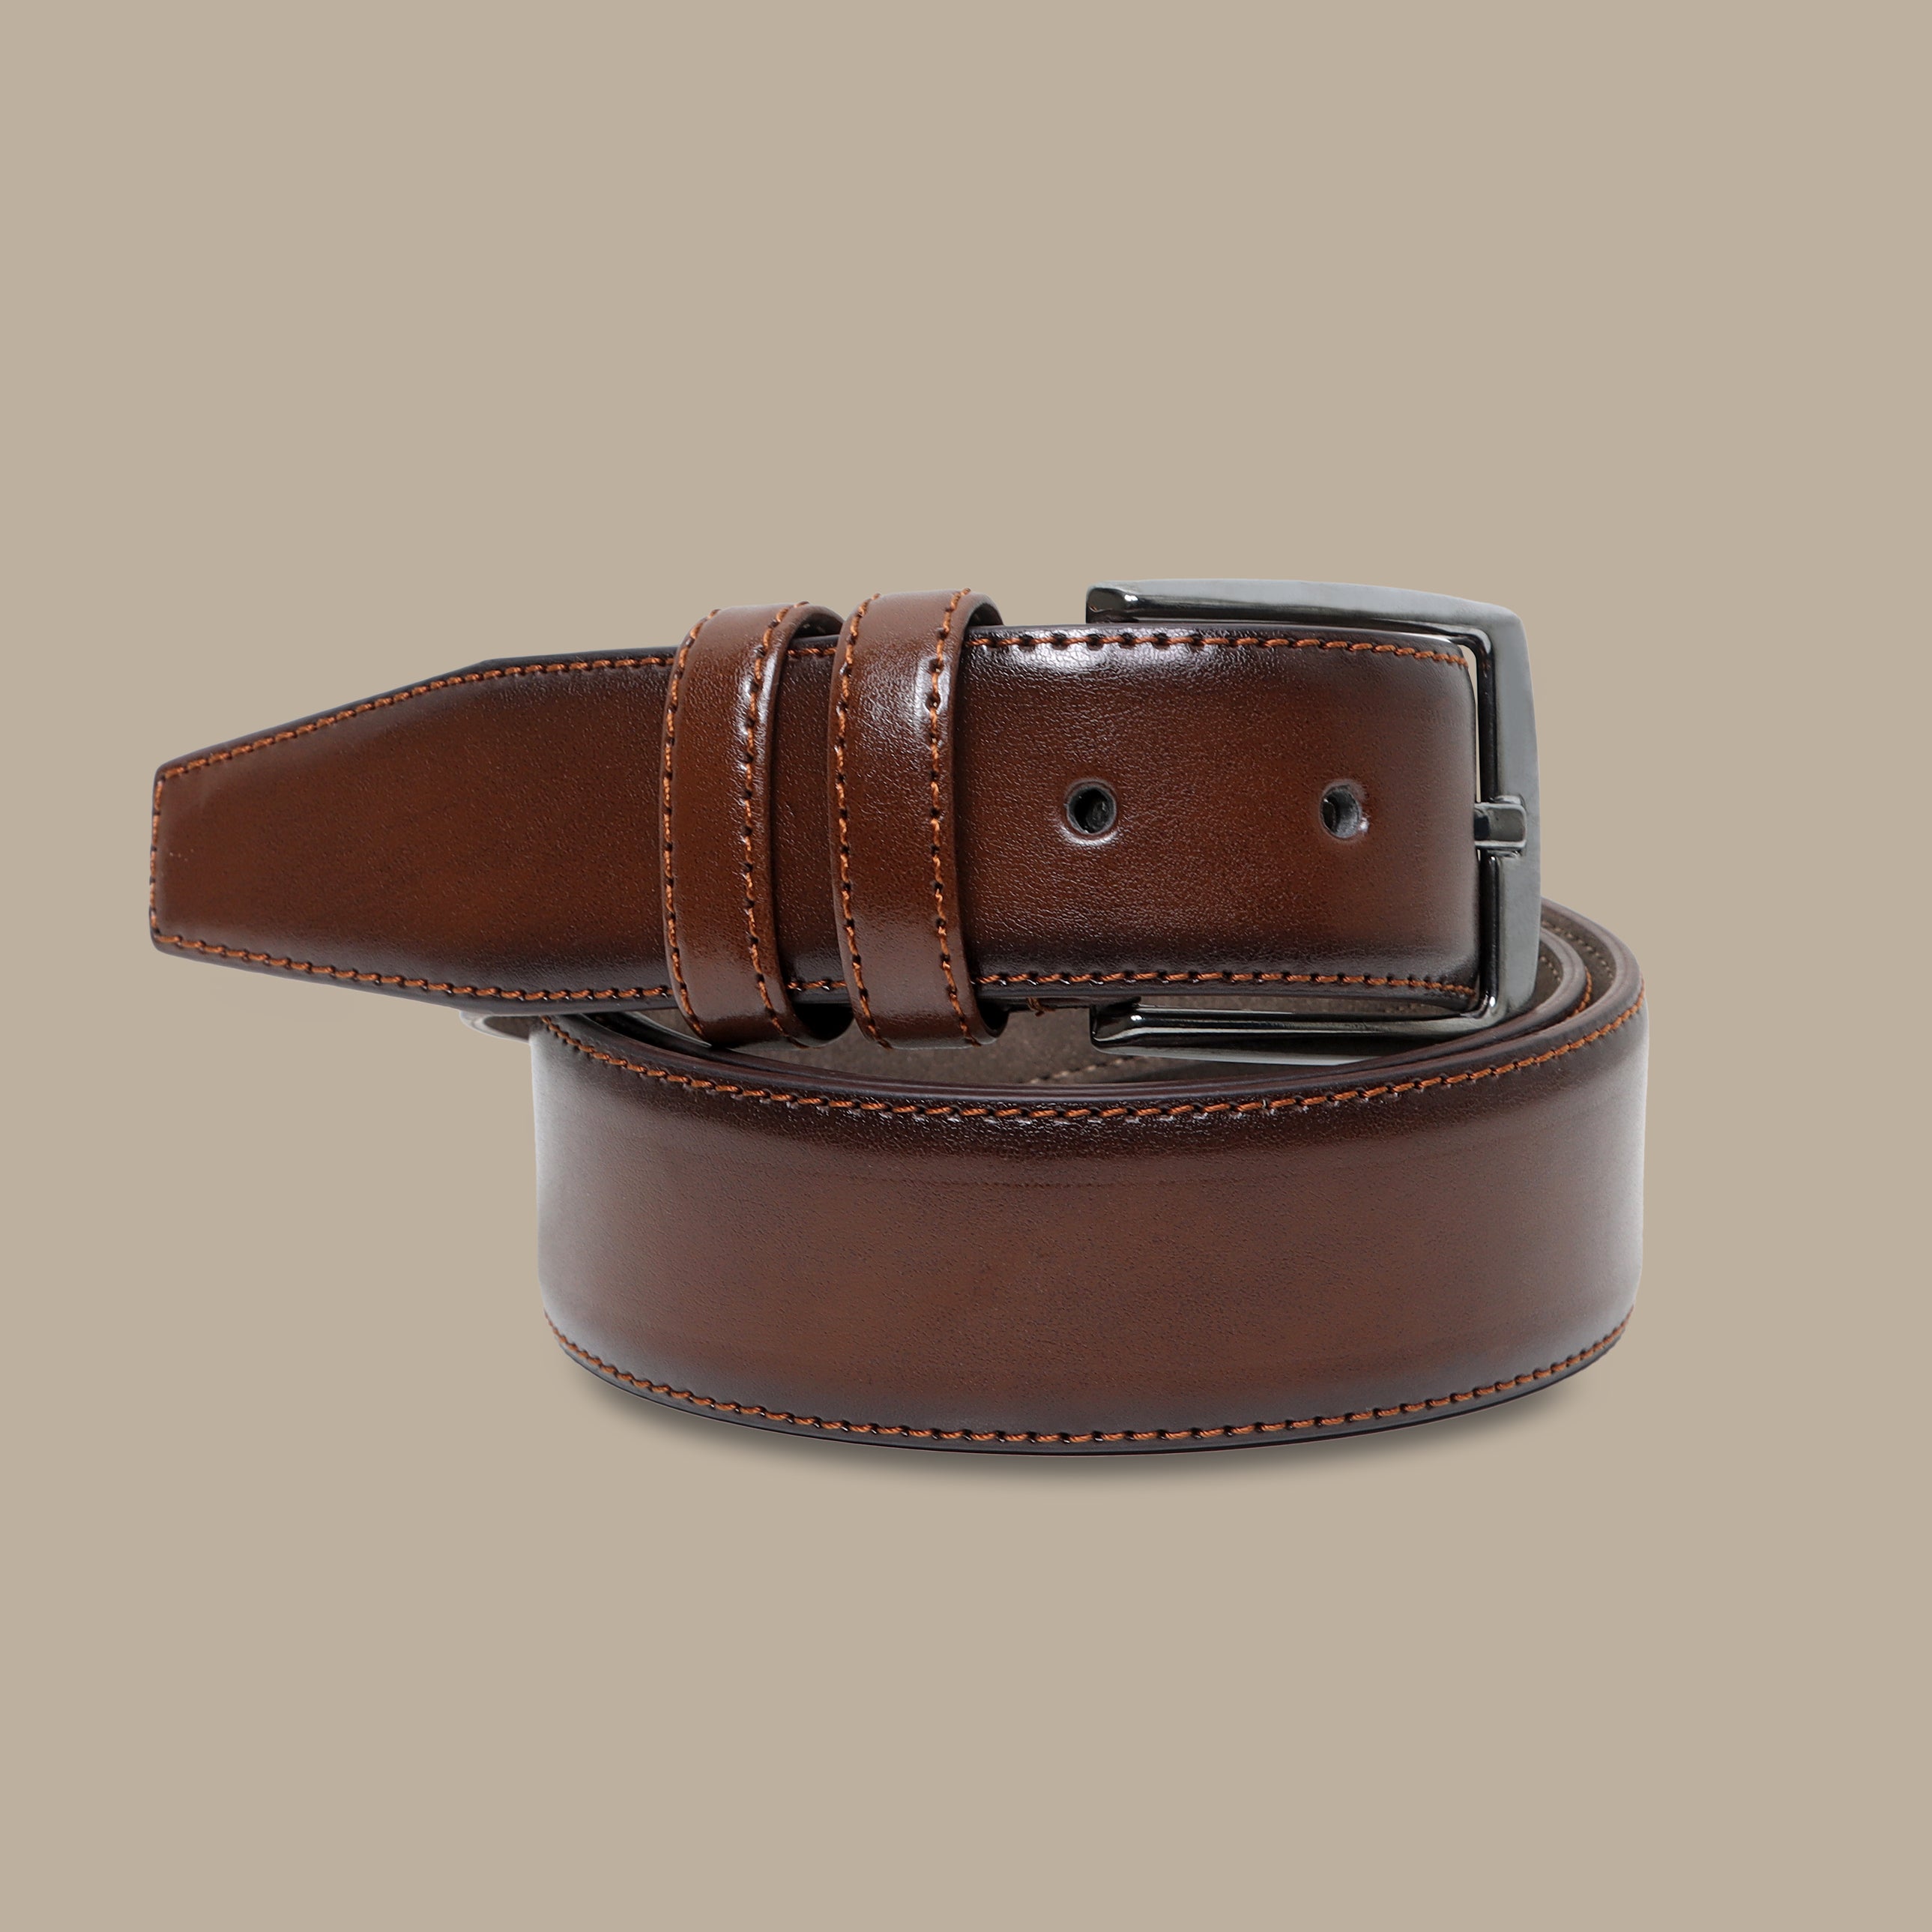 Cocoa Classic: Basic Brown PU Belt for Timeless Appeal